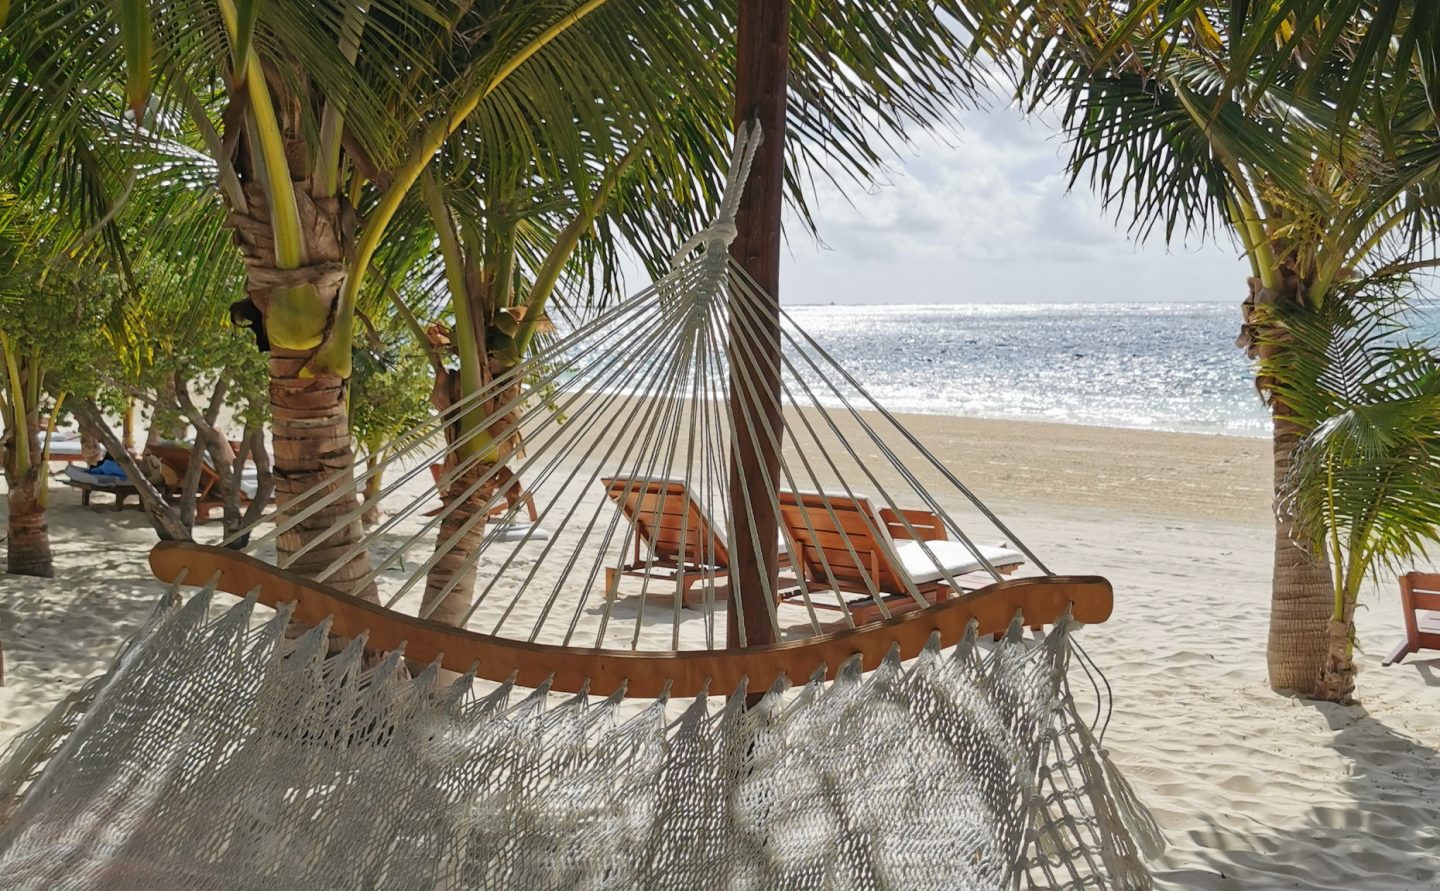 Relax in a hammock under palm trees and look at the white beach and the crystal clear sea of Mexico